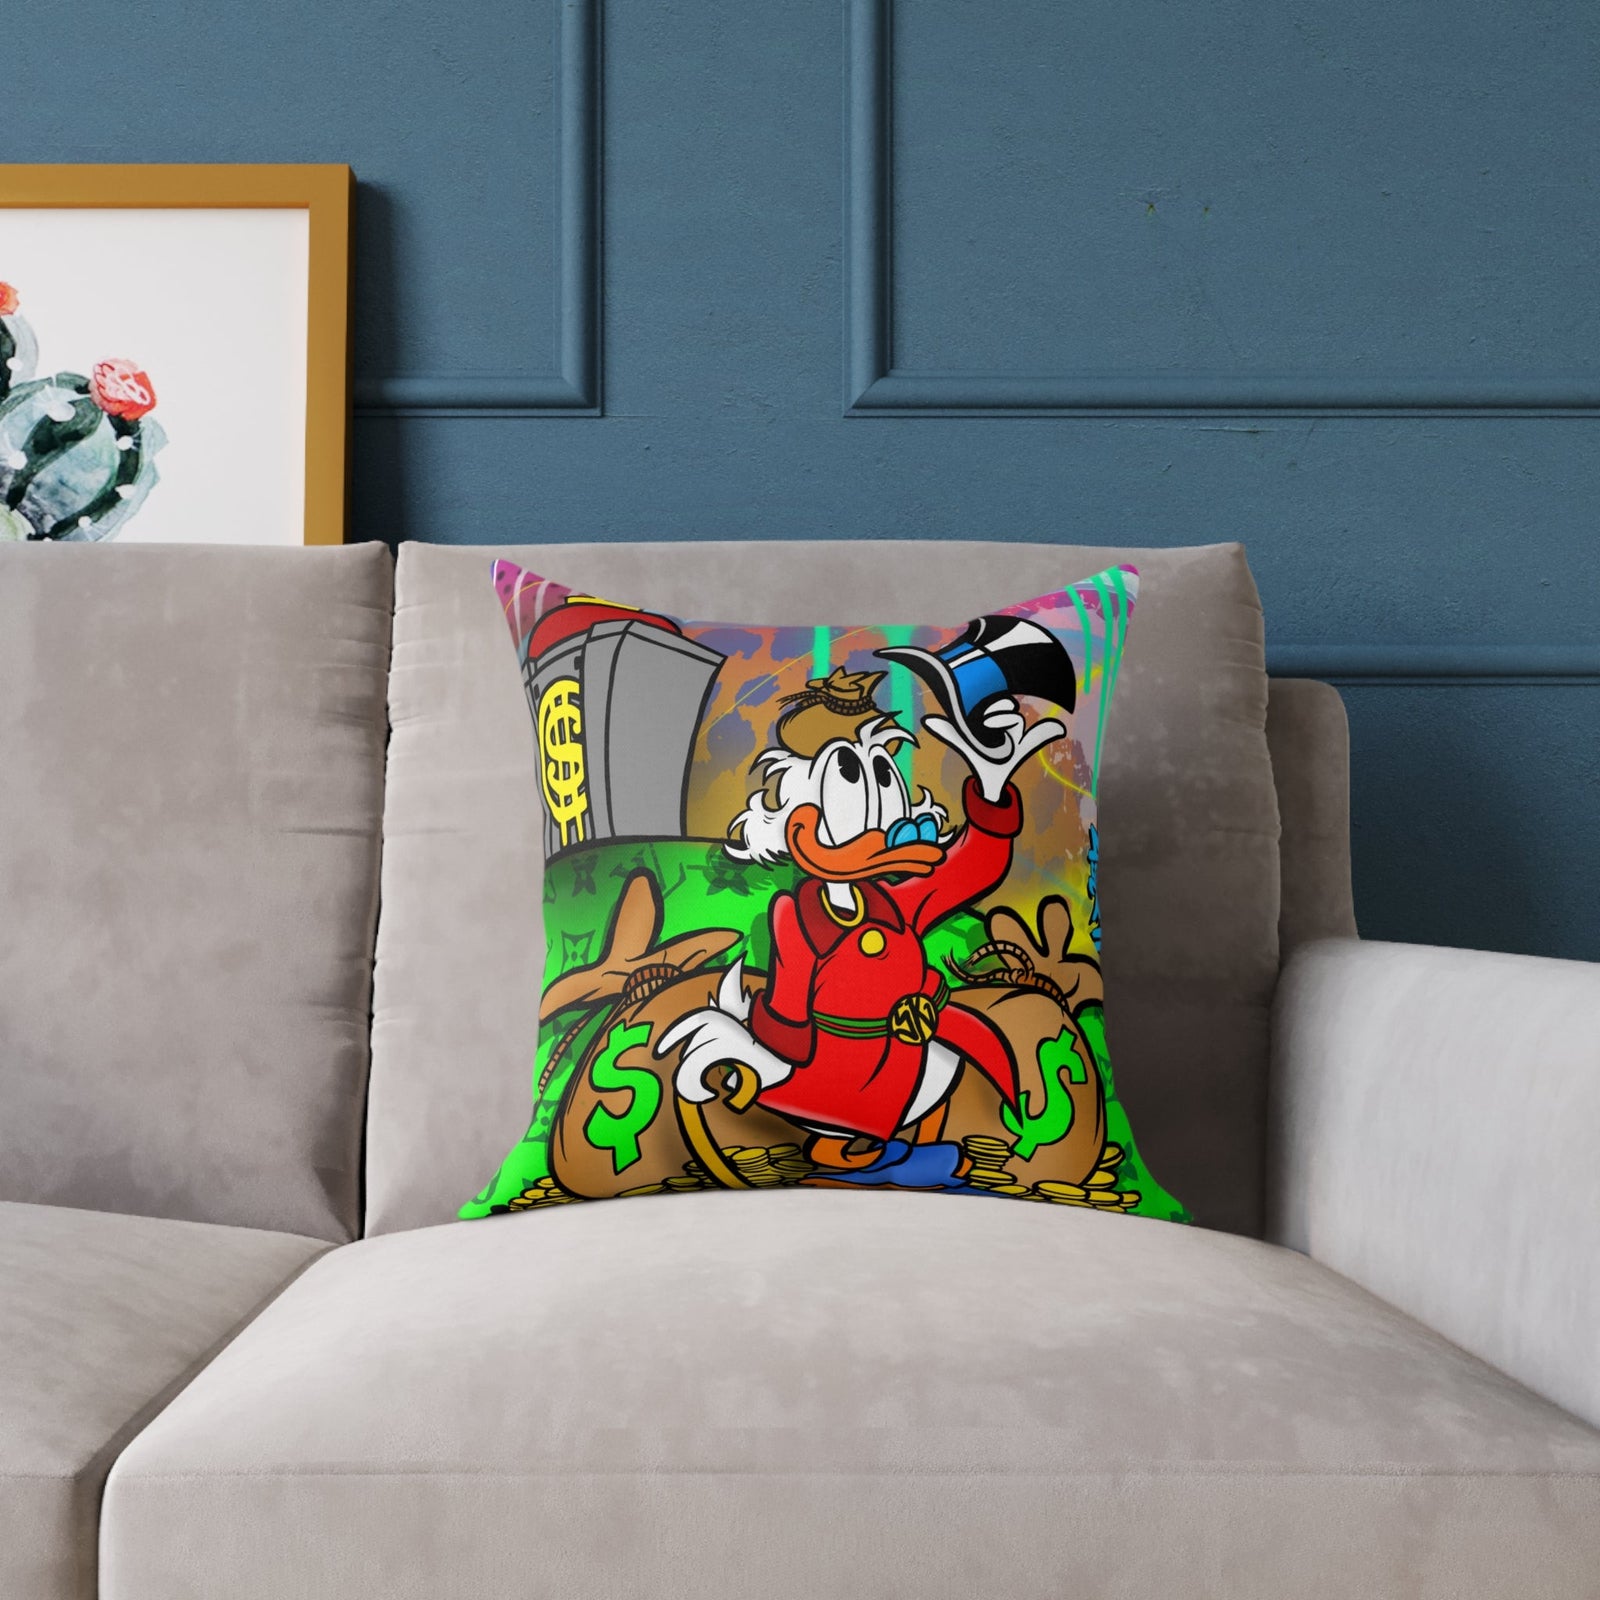 SK x Scrooge Polyester Pillow - Sean Keith Art